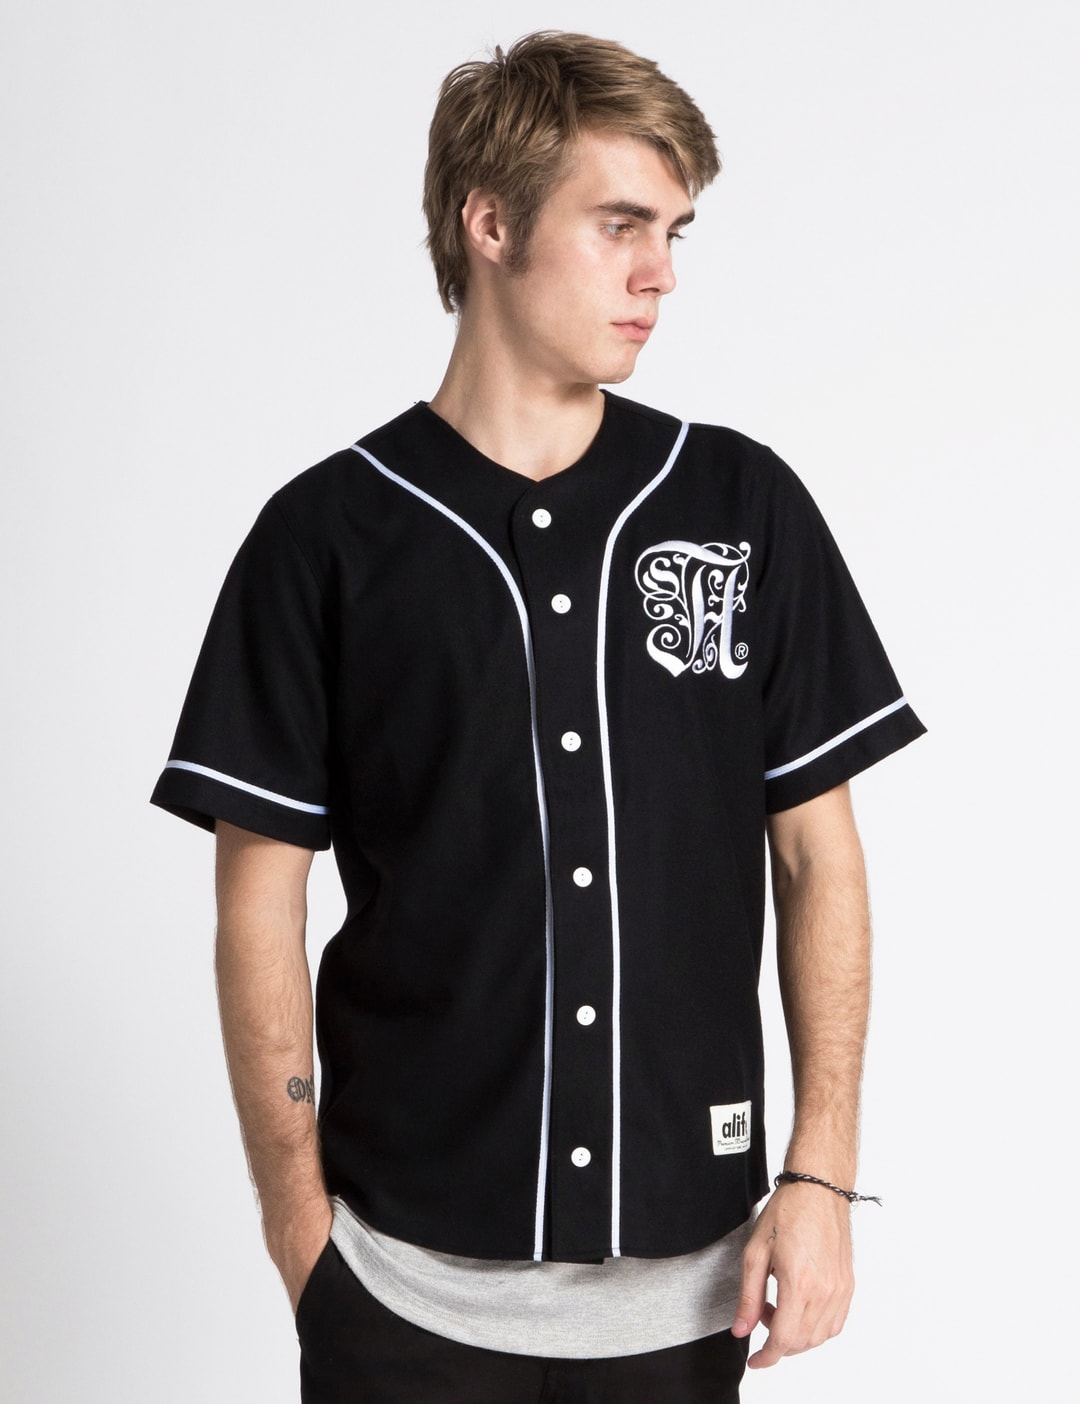 ALIFE - Black Antique A Baseball Jersey | HBX - Globally Curated ...